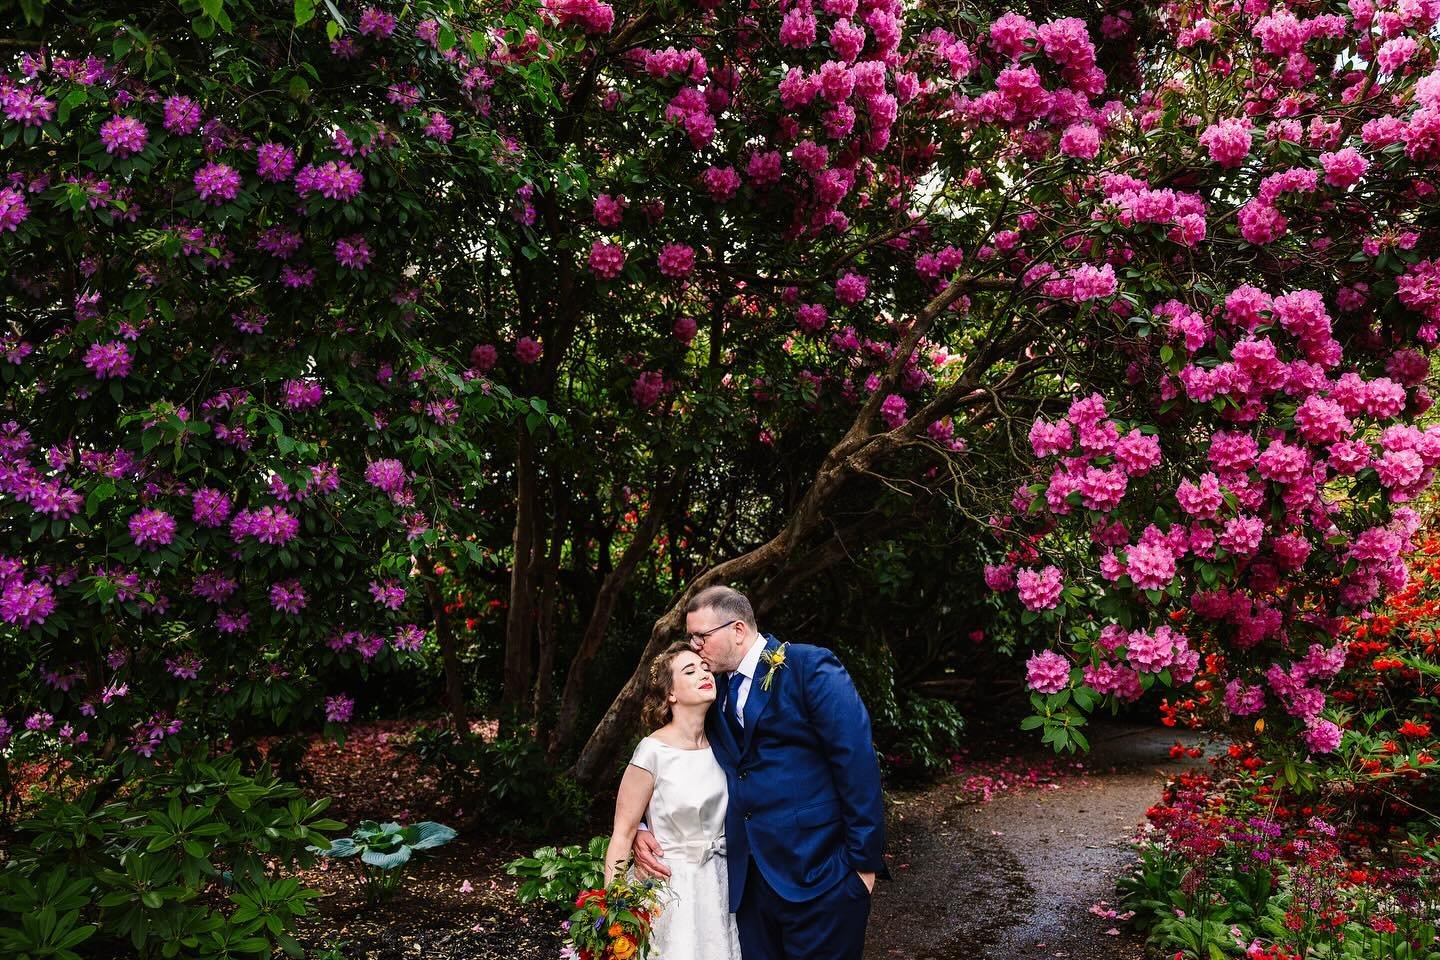 Rhododendron&rsquo;s are looking utterly spectacular at the moment, bet they are looking amazing @bhambotanicalgardens just like they did here at Janette and Matt&rsquo;s wedding where I got to combine my two loves. Weddings and plants! 🌿🪷
⠀⠀⠀⠀⠀⠀⠀⠀